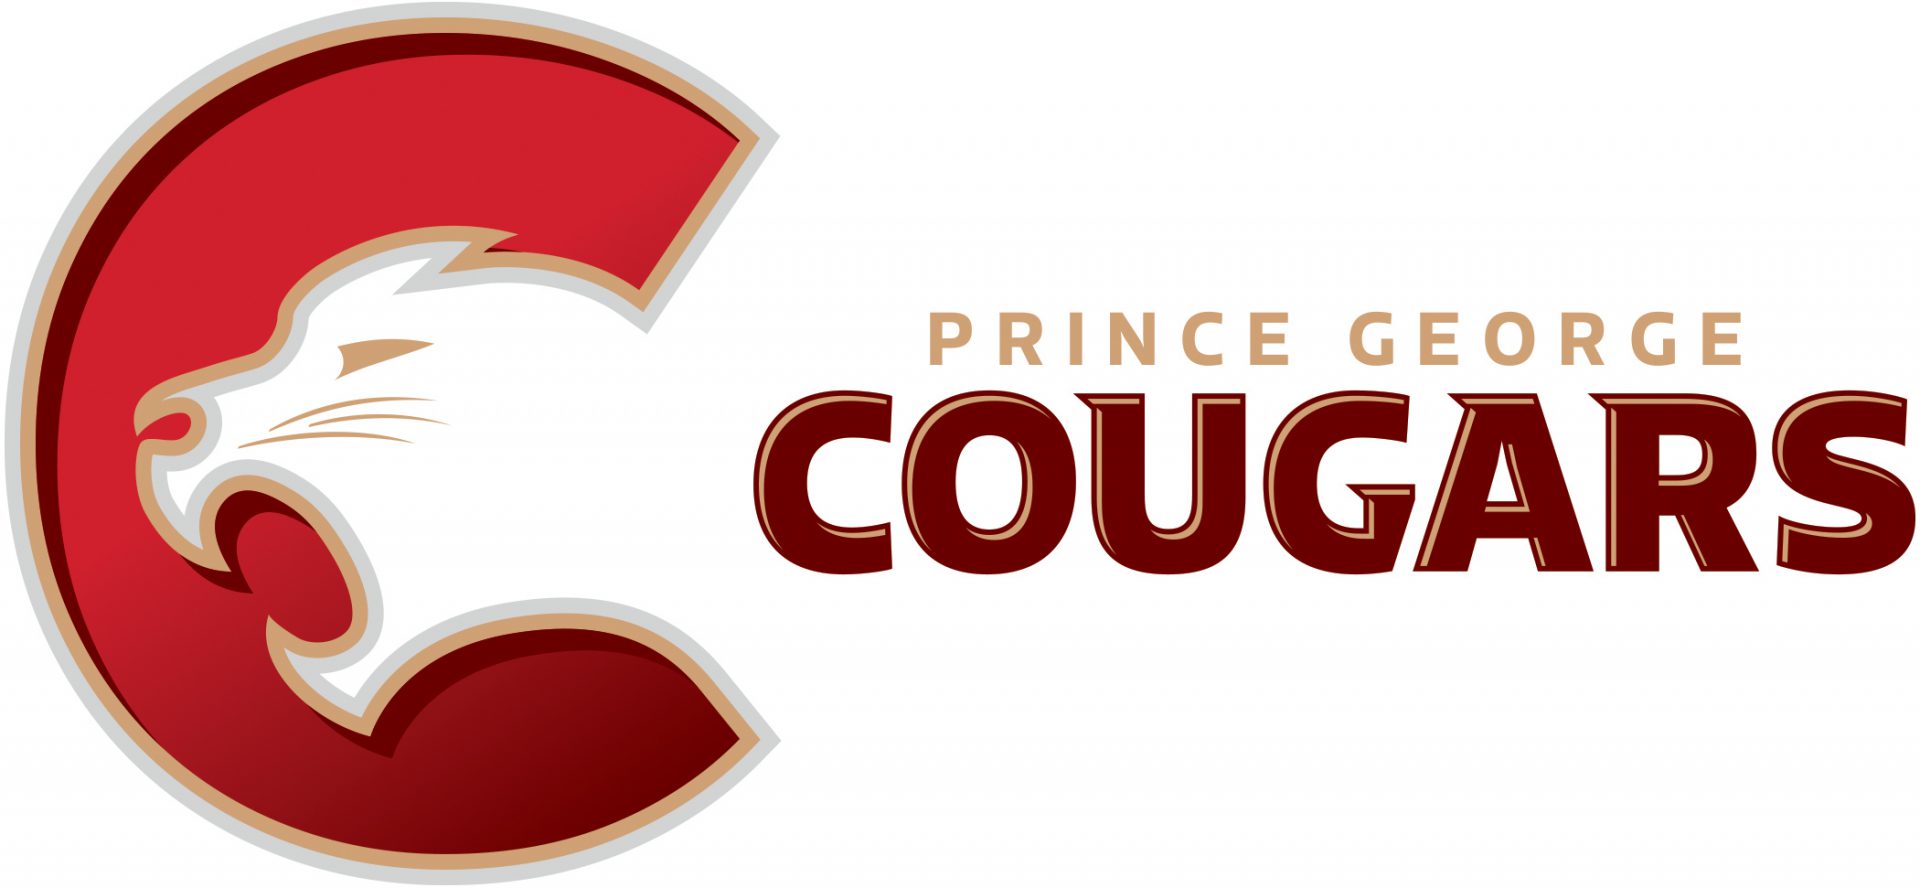 Cougars have 25 weekend home games